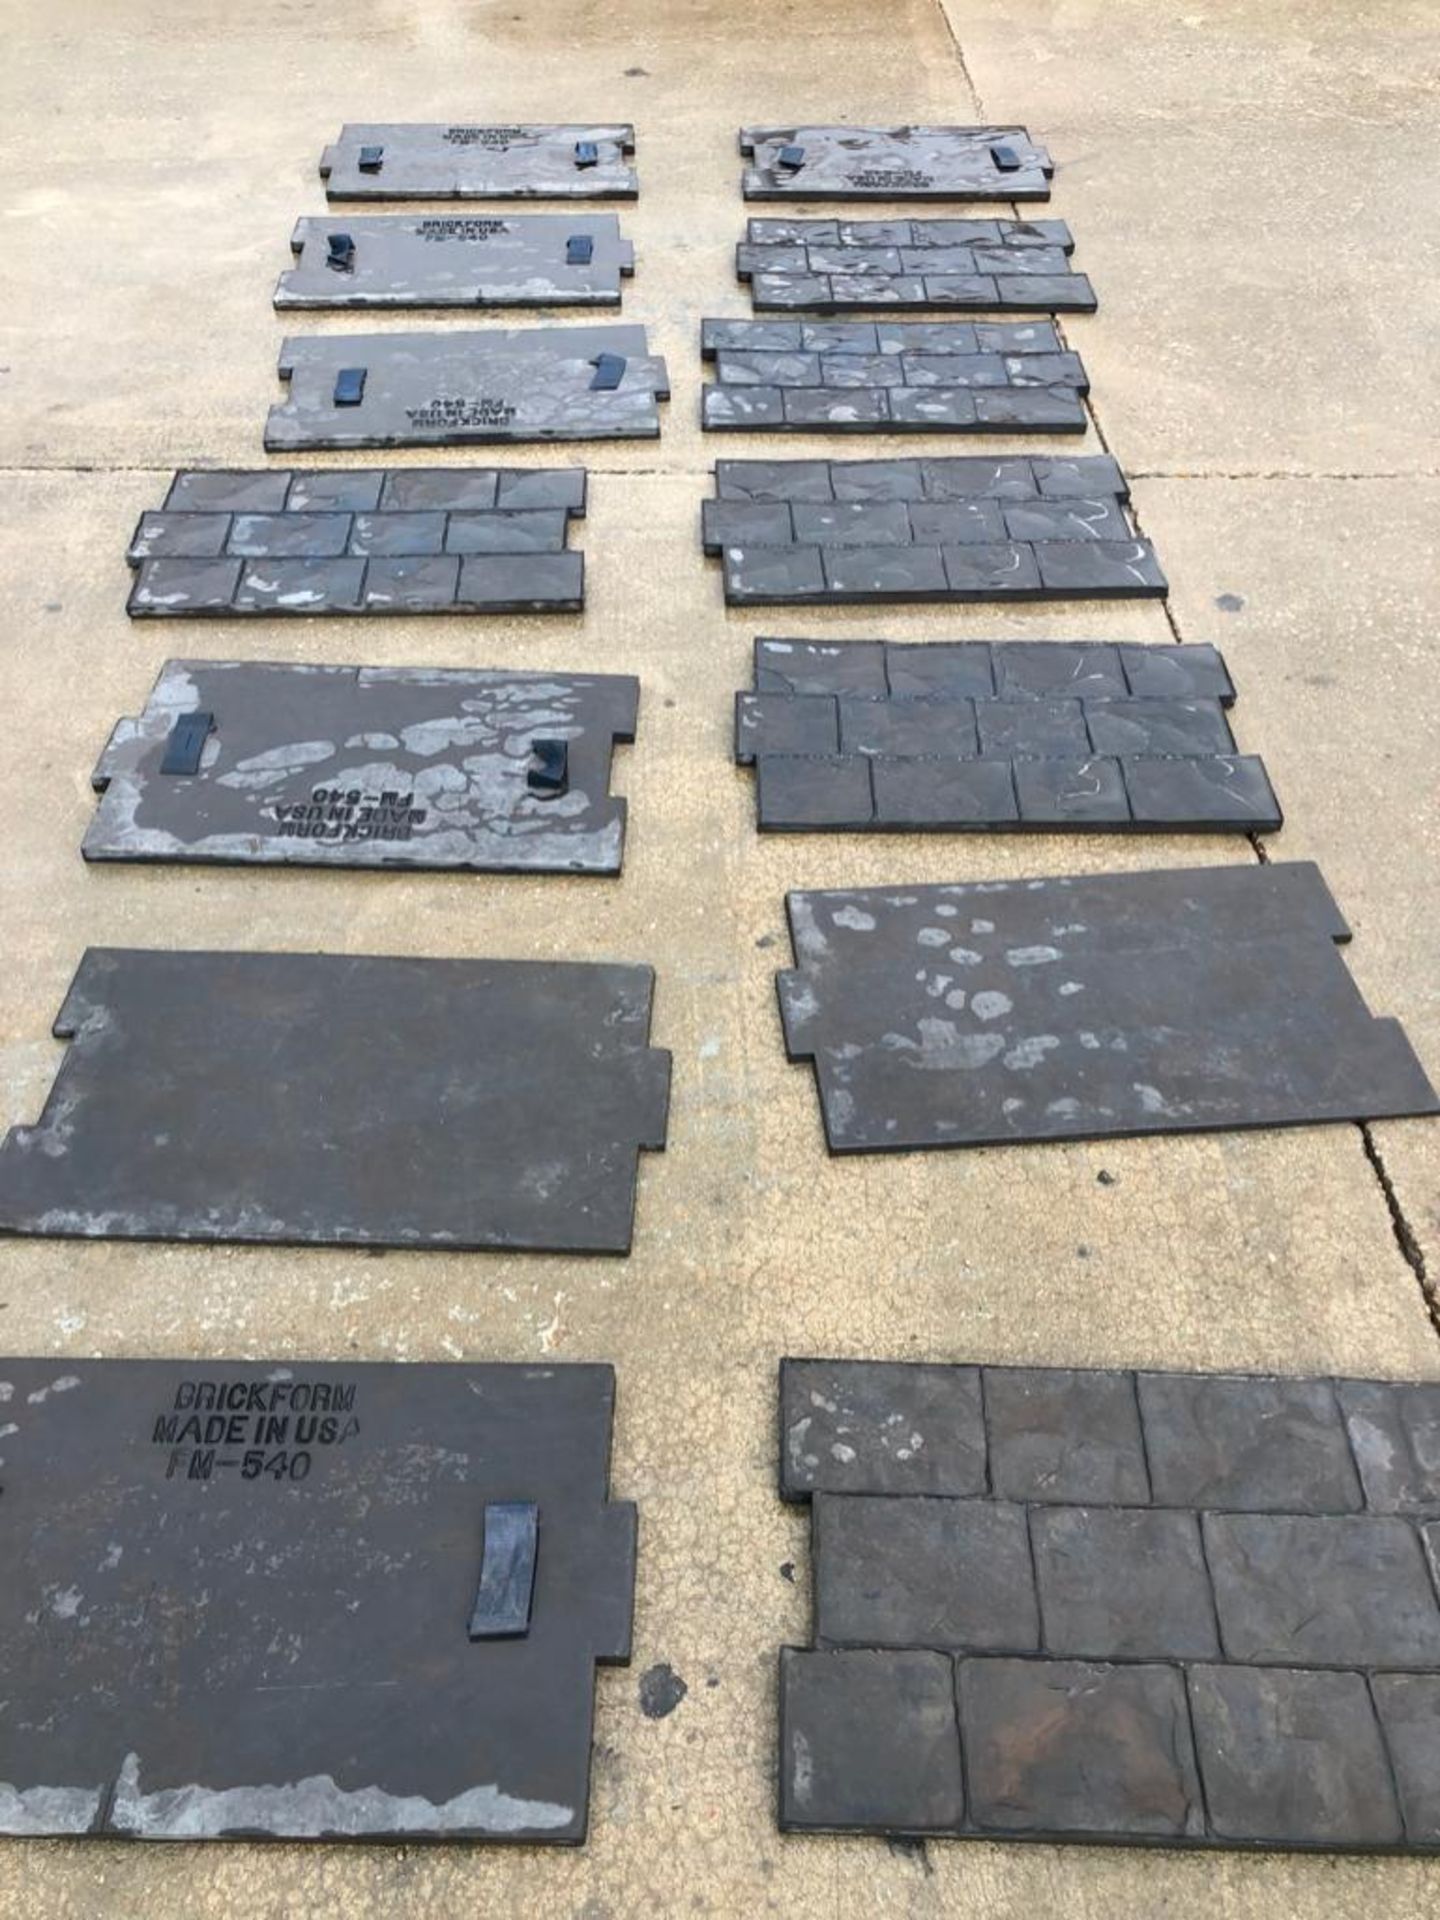 (14) Brickform FM-540 Concrete Stamps.  Located in Hazelwood, MO